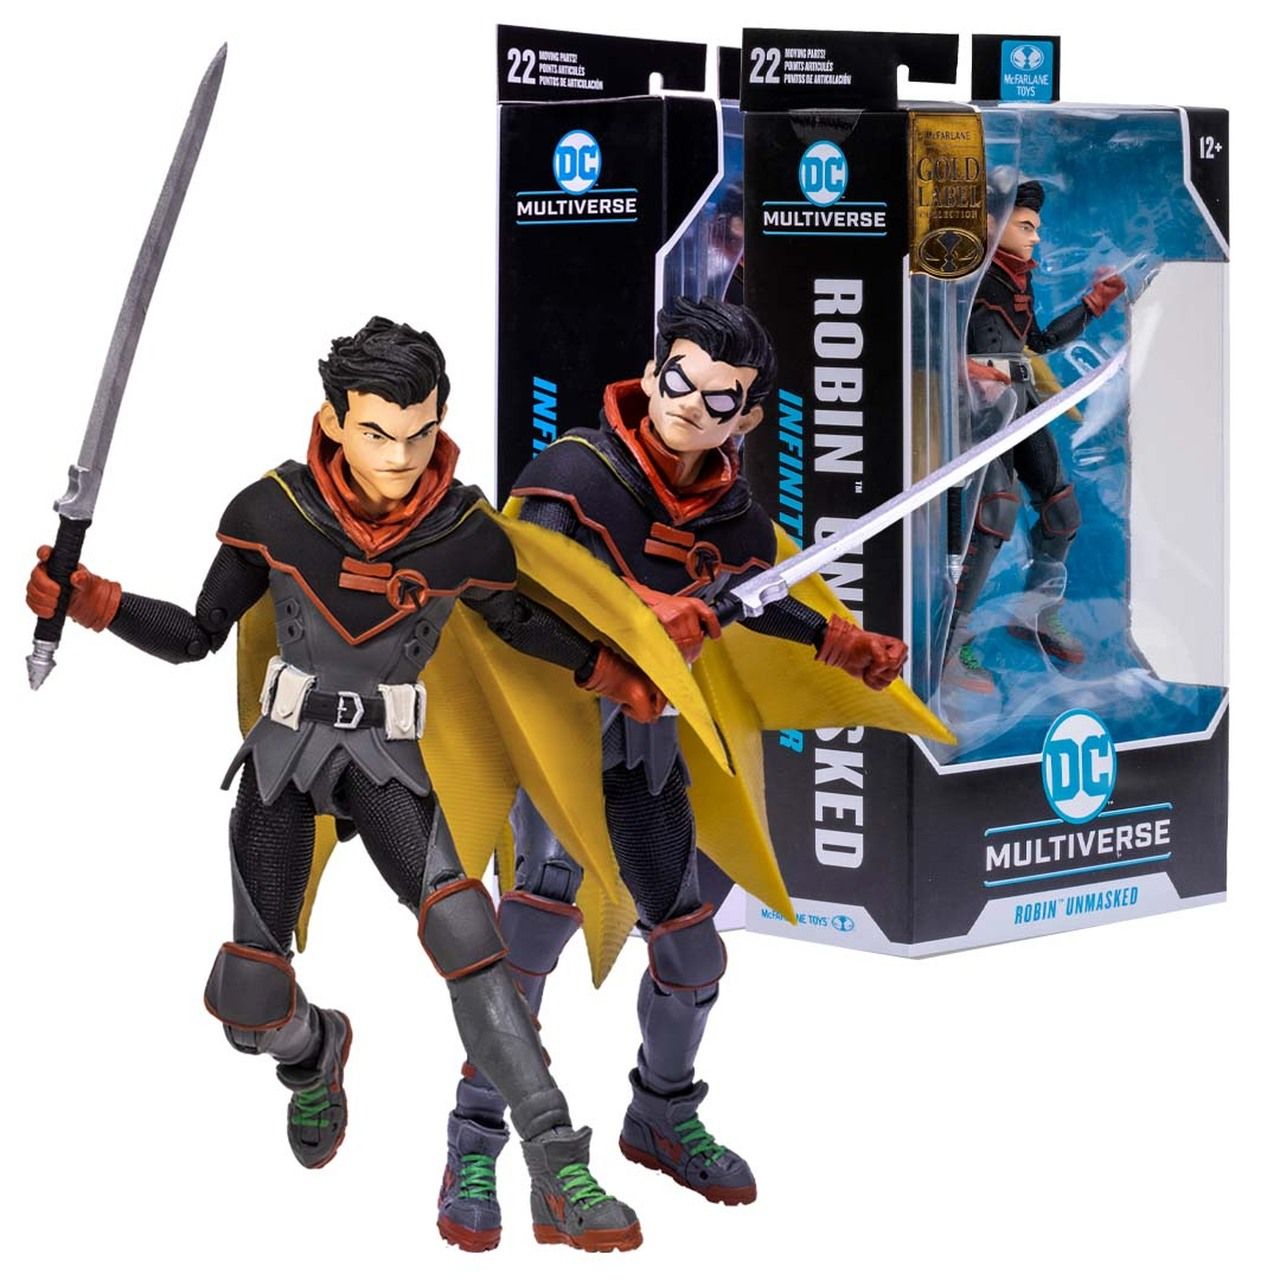 Both the masked and unmasked action figures of Damian Wayne's Robin stand near their packaging.